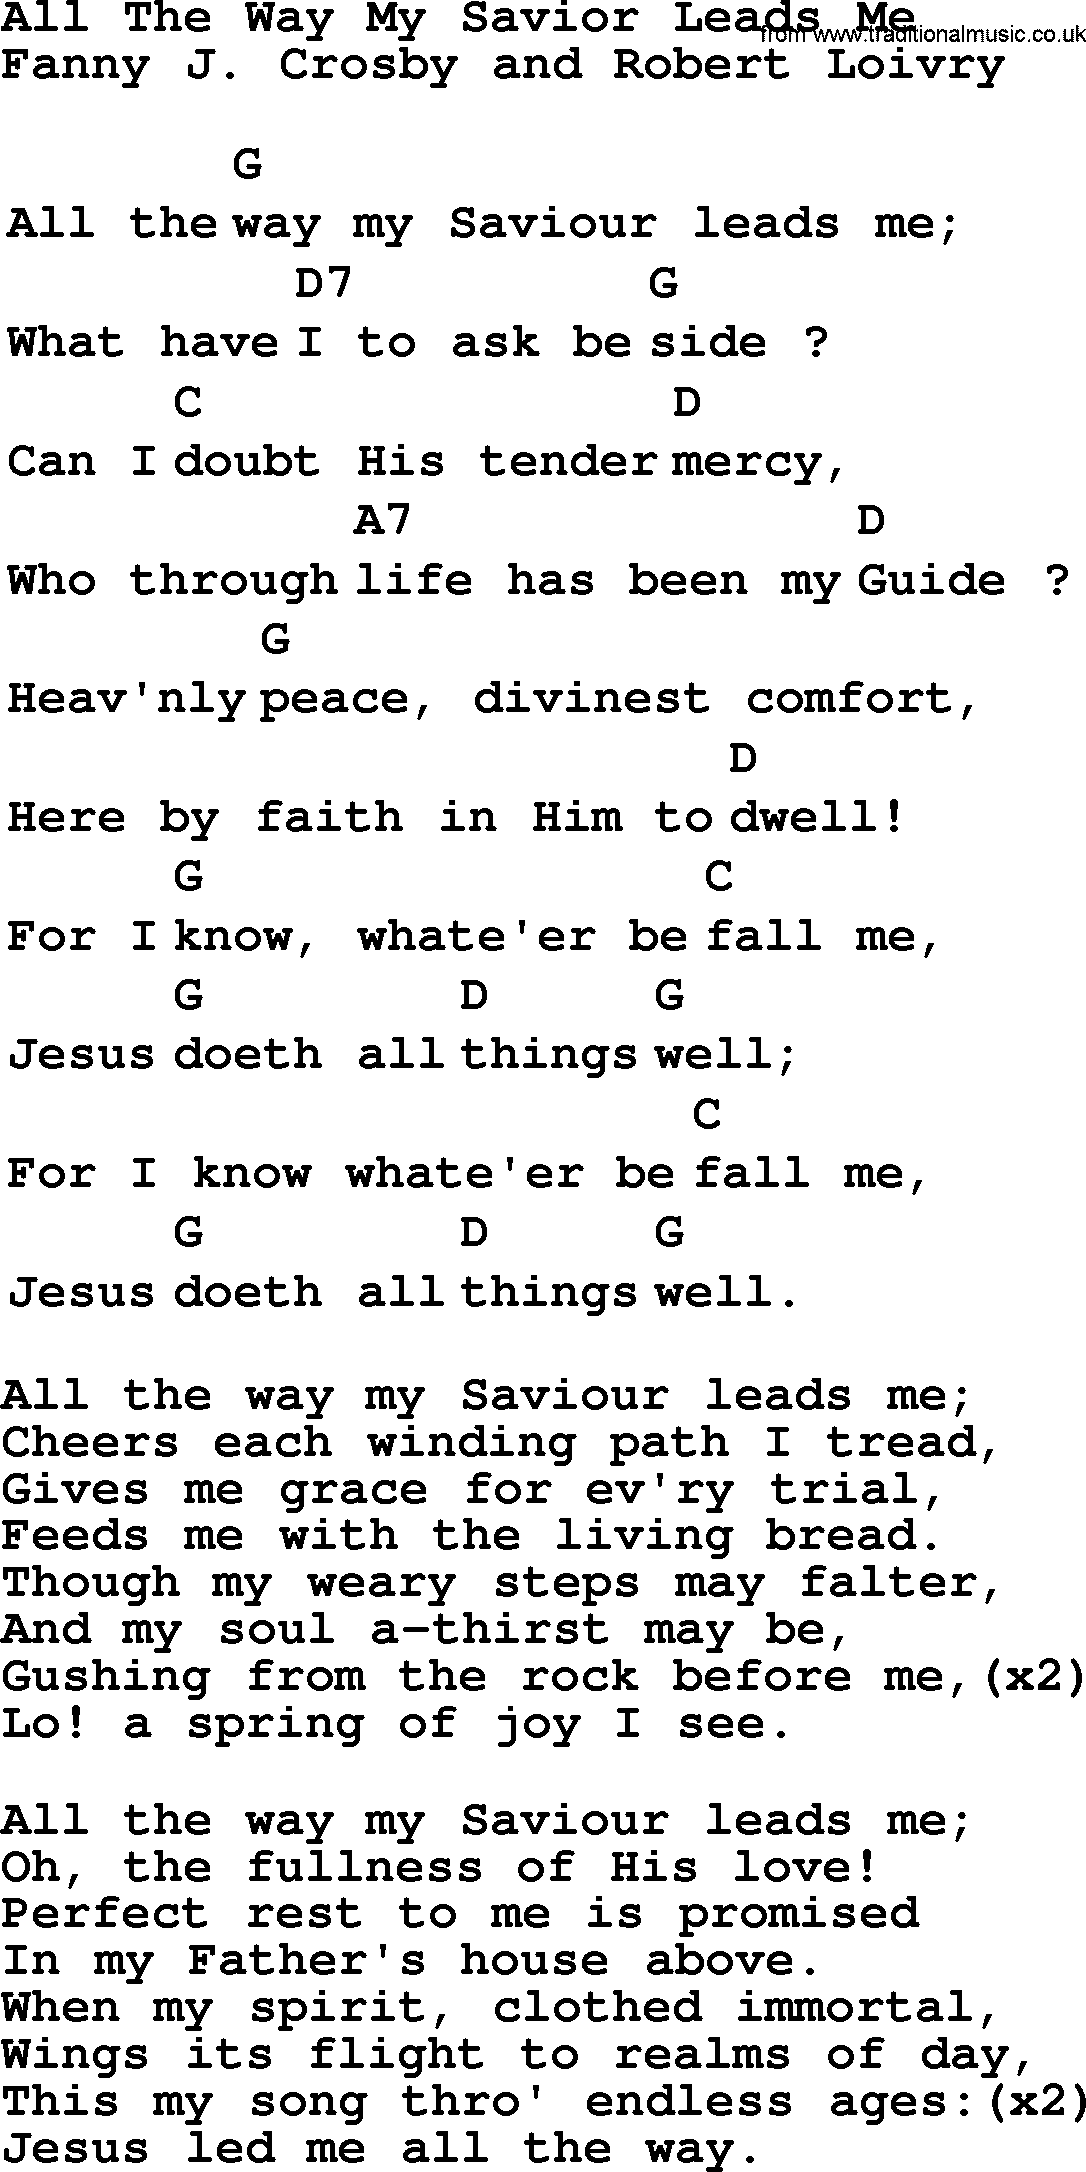 Top 1000 Most Popular Folk and Old-time Songs: All The Way My Savior Leads Me, lyrics and chords